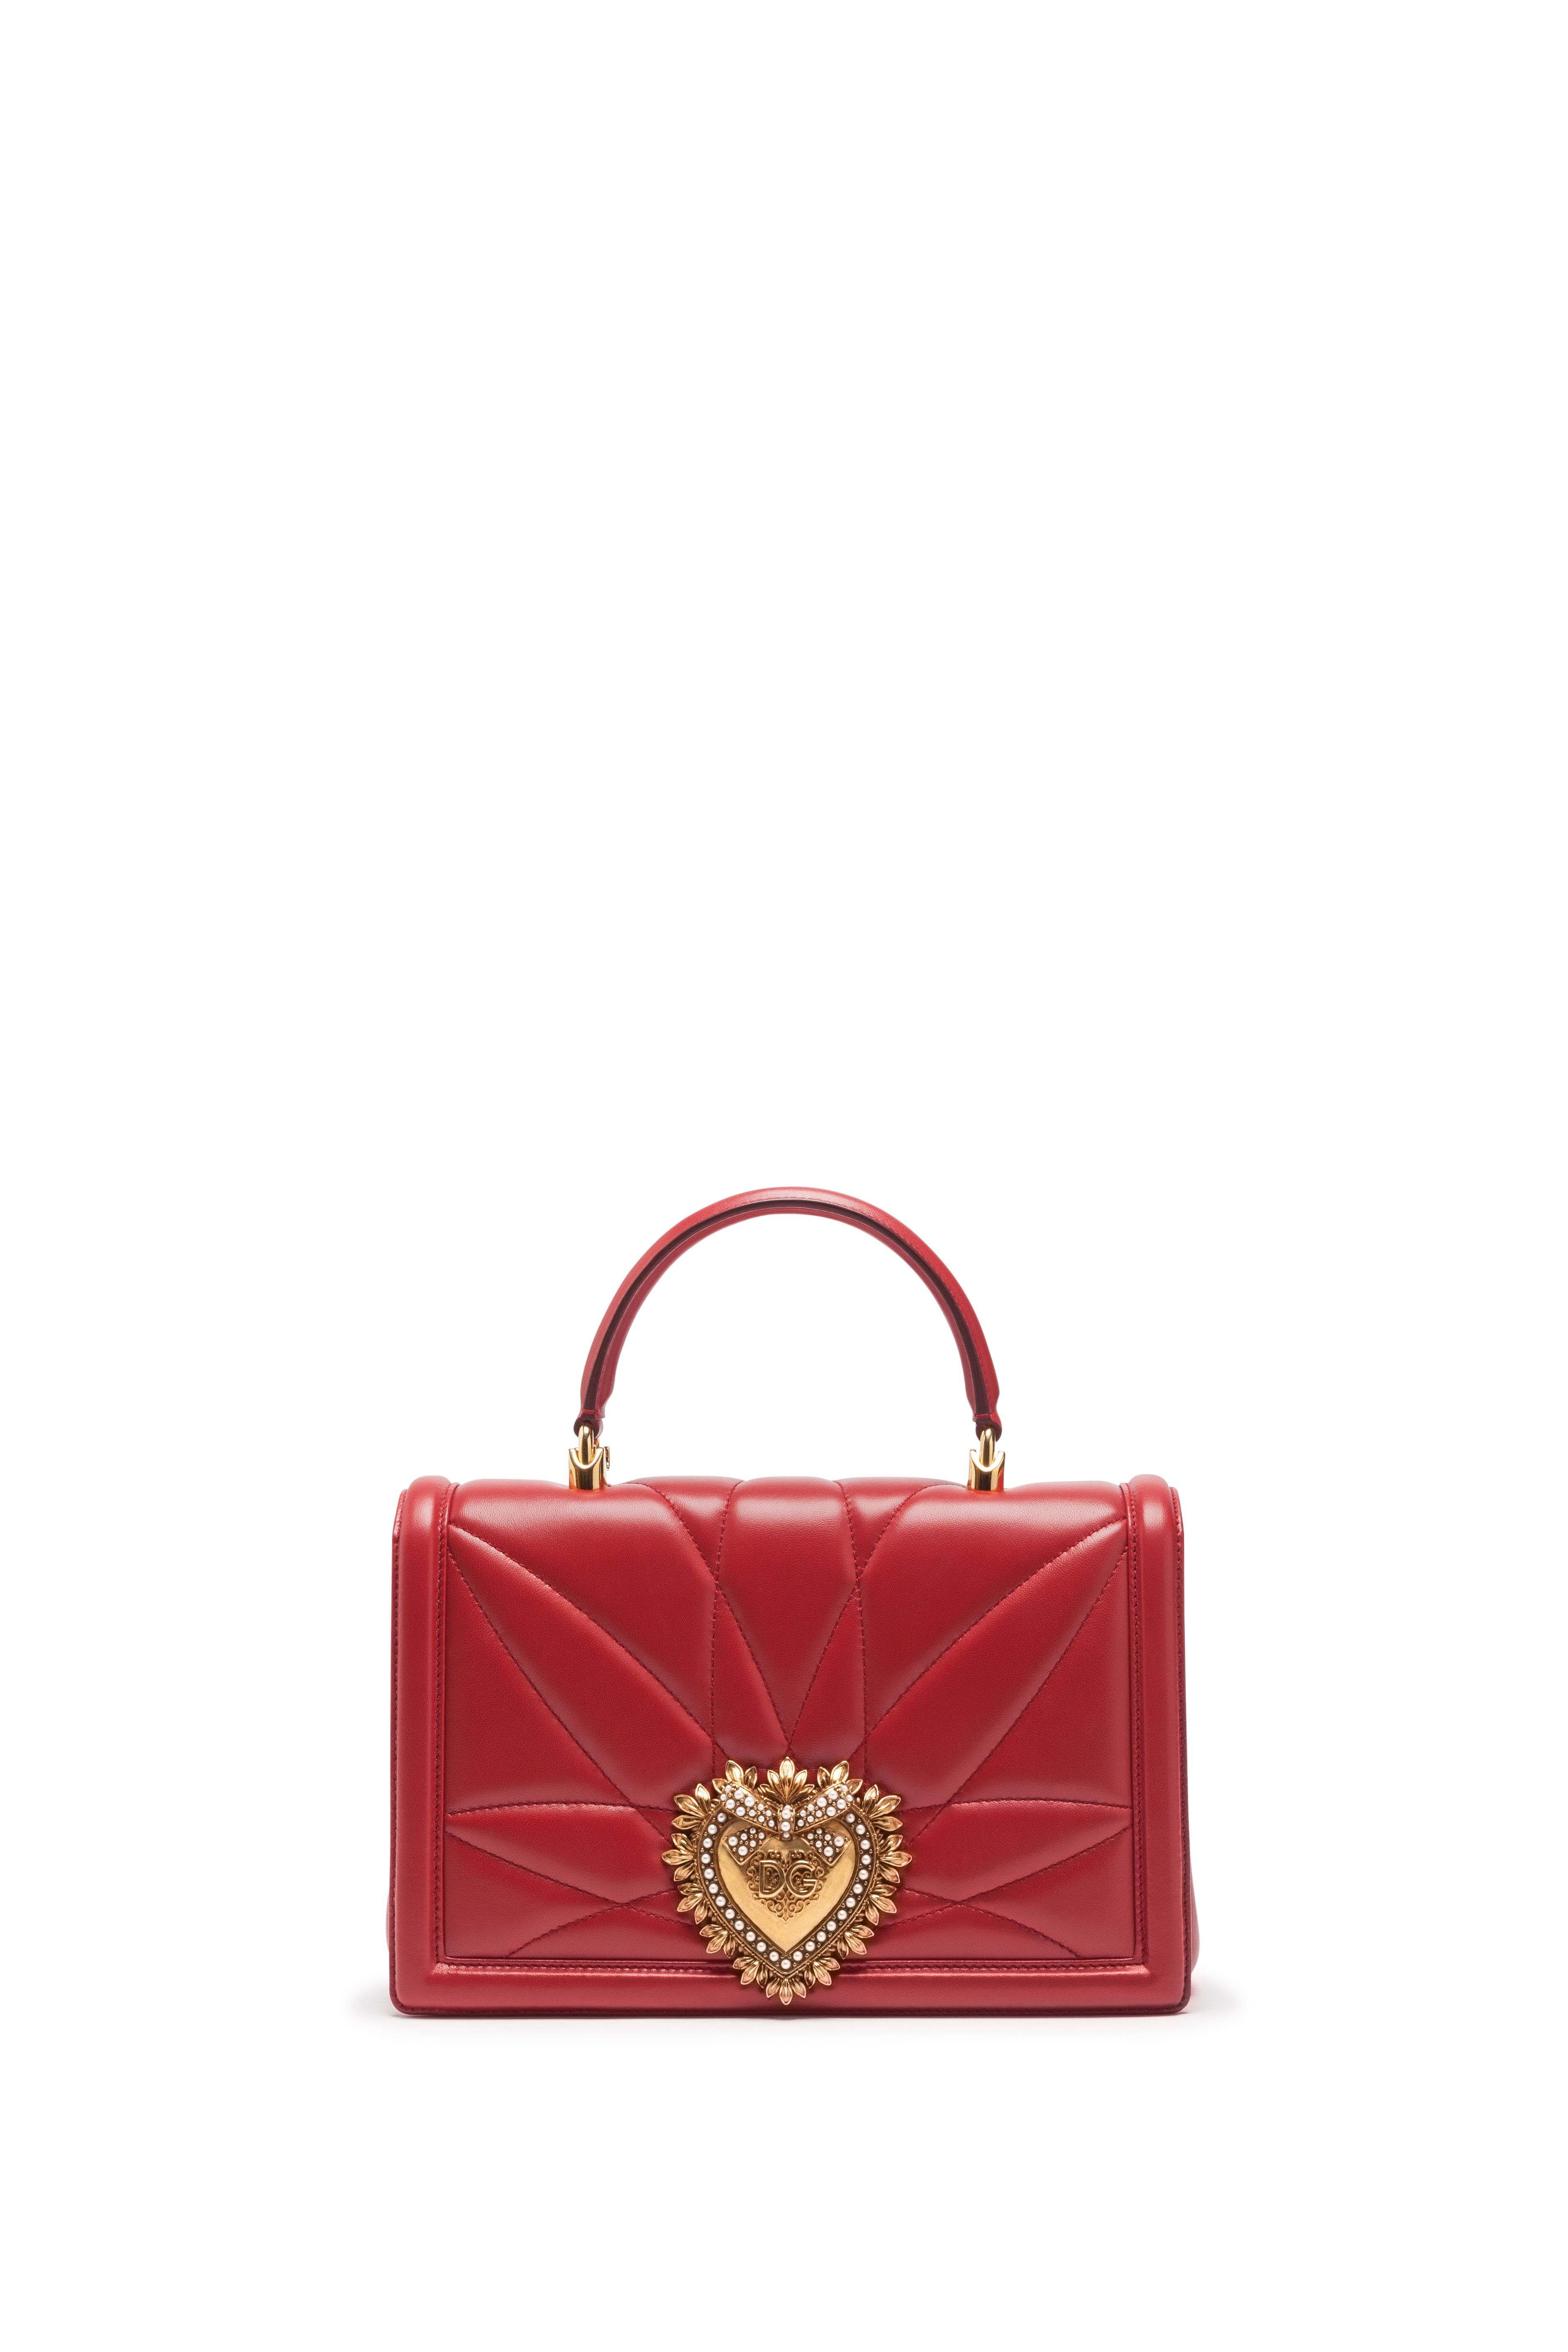 5 Things To Know About Dolce & Gabbana's New Devotion Bag